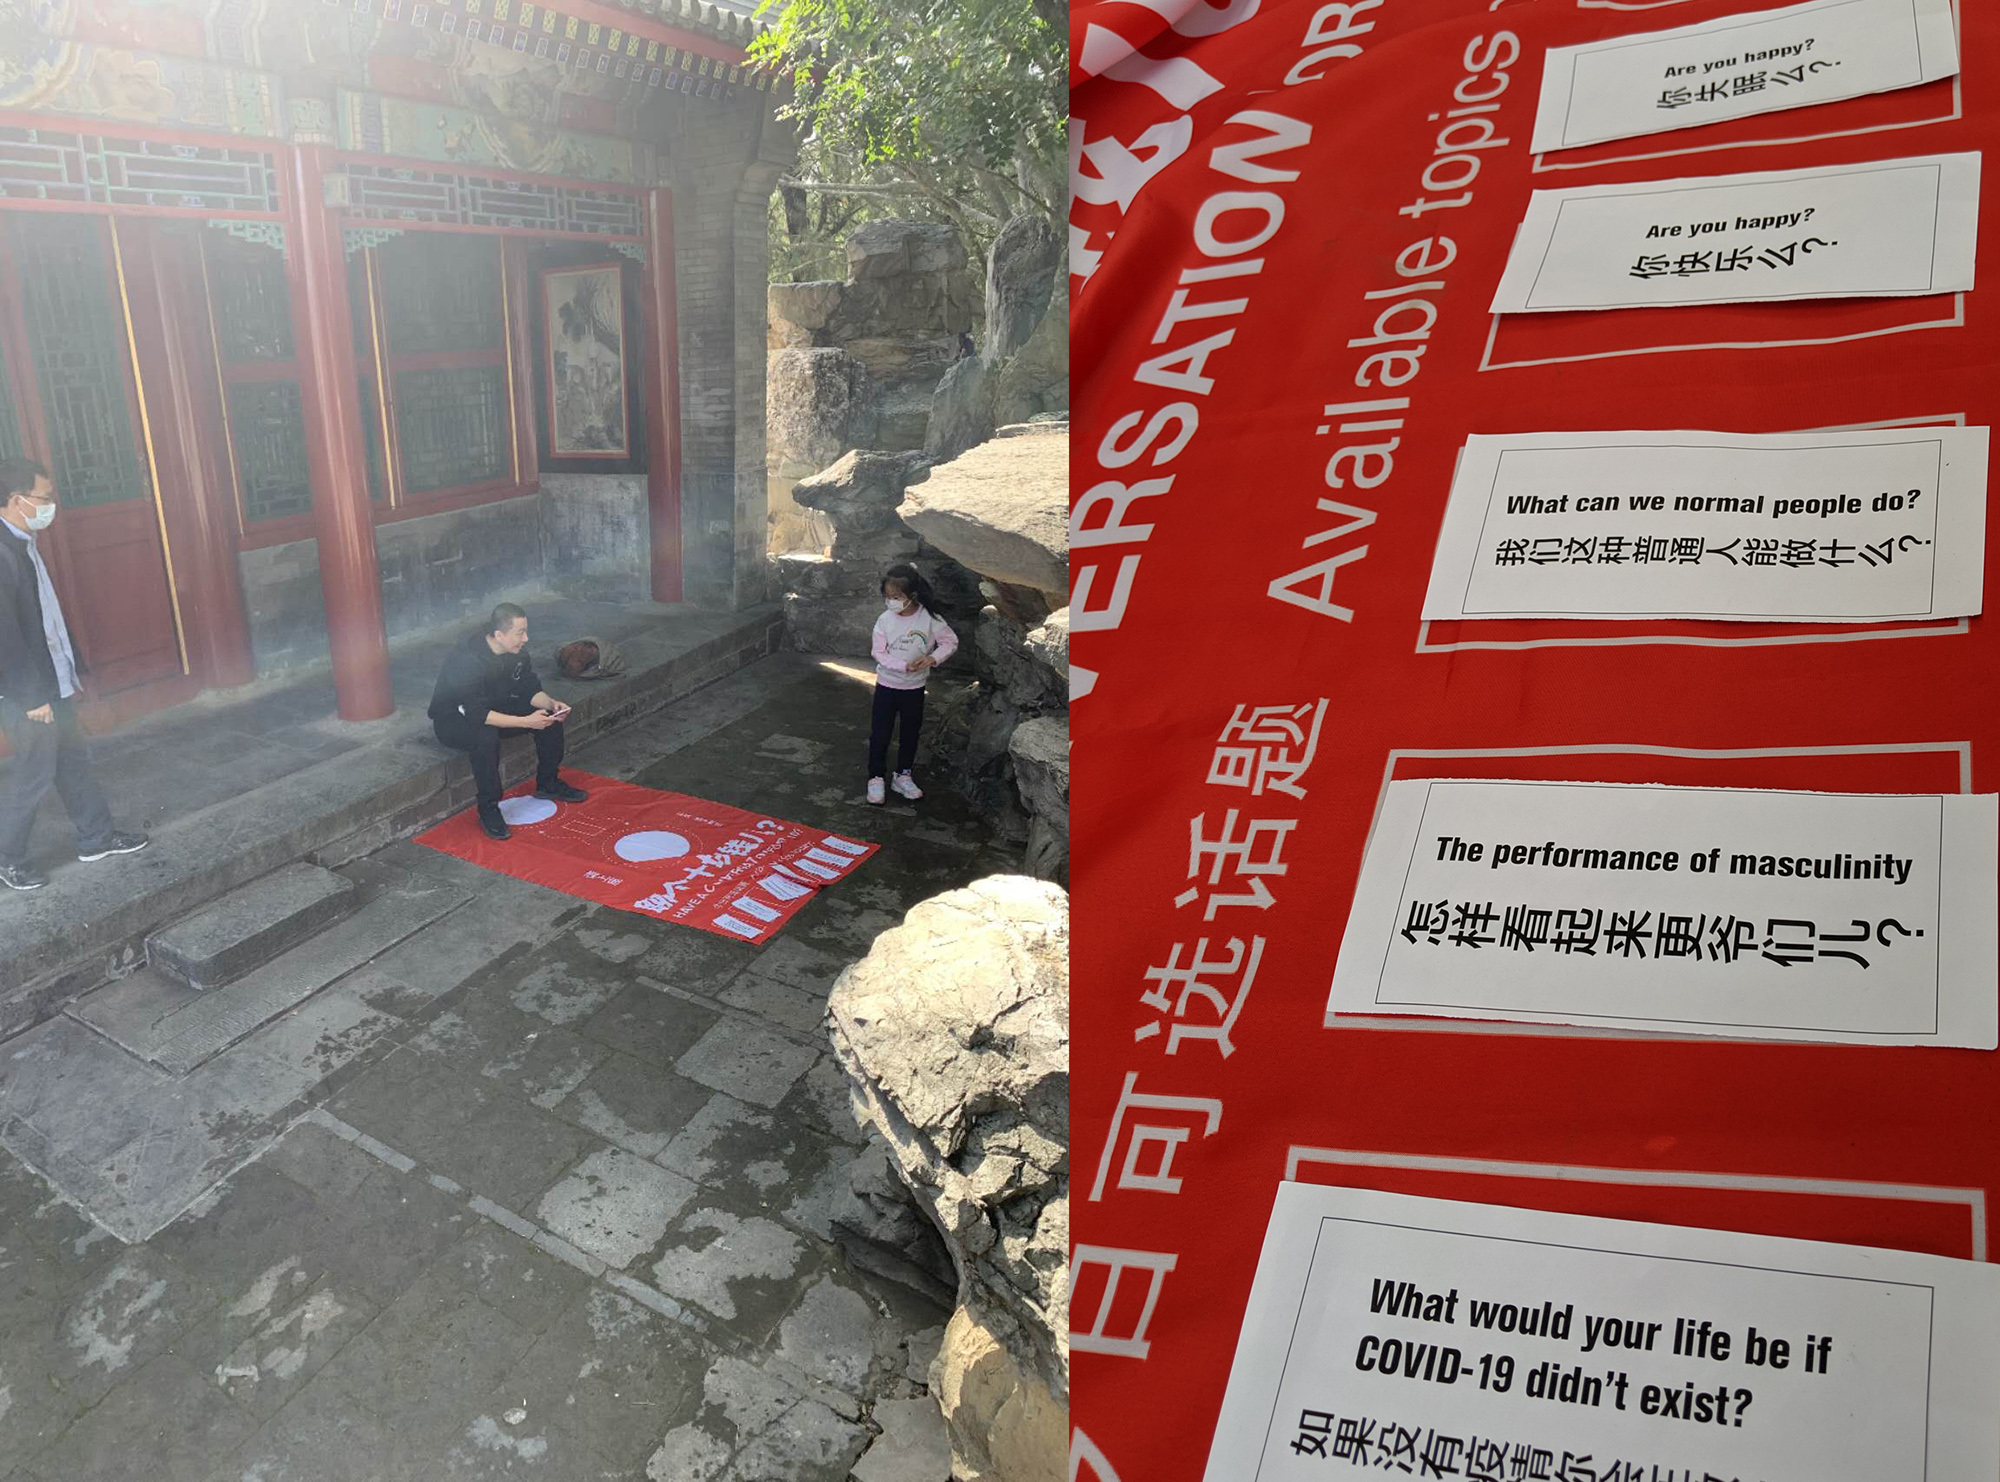 Two images of a person posing as a fortune teller in an attempt to engage sensitive conversations in communist China.